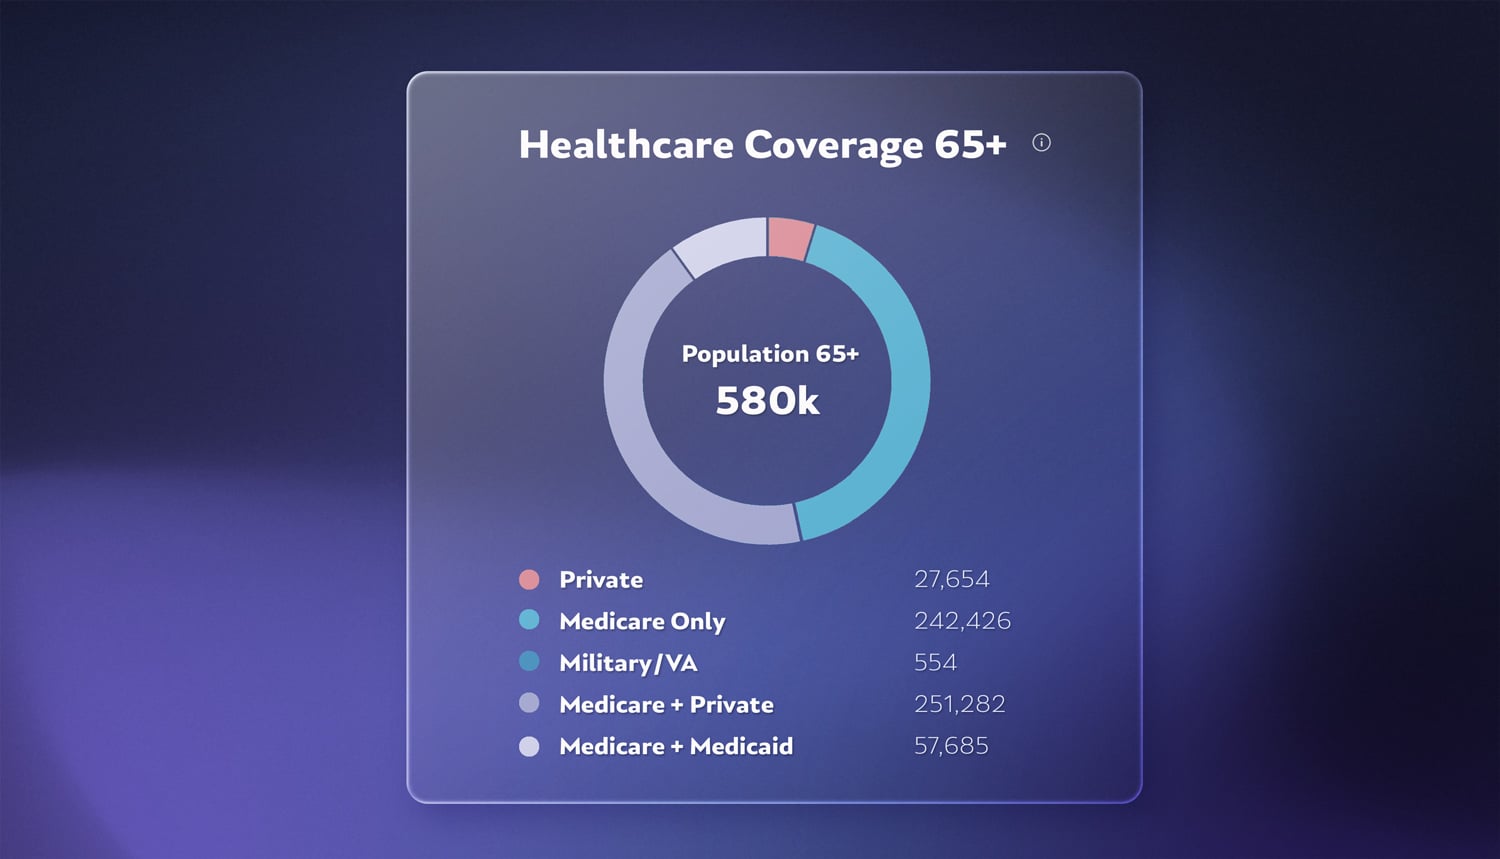 Seniors housing healthcare coverage for 65 years and up data